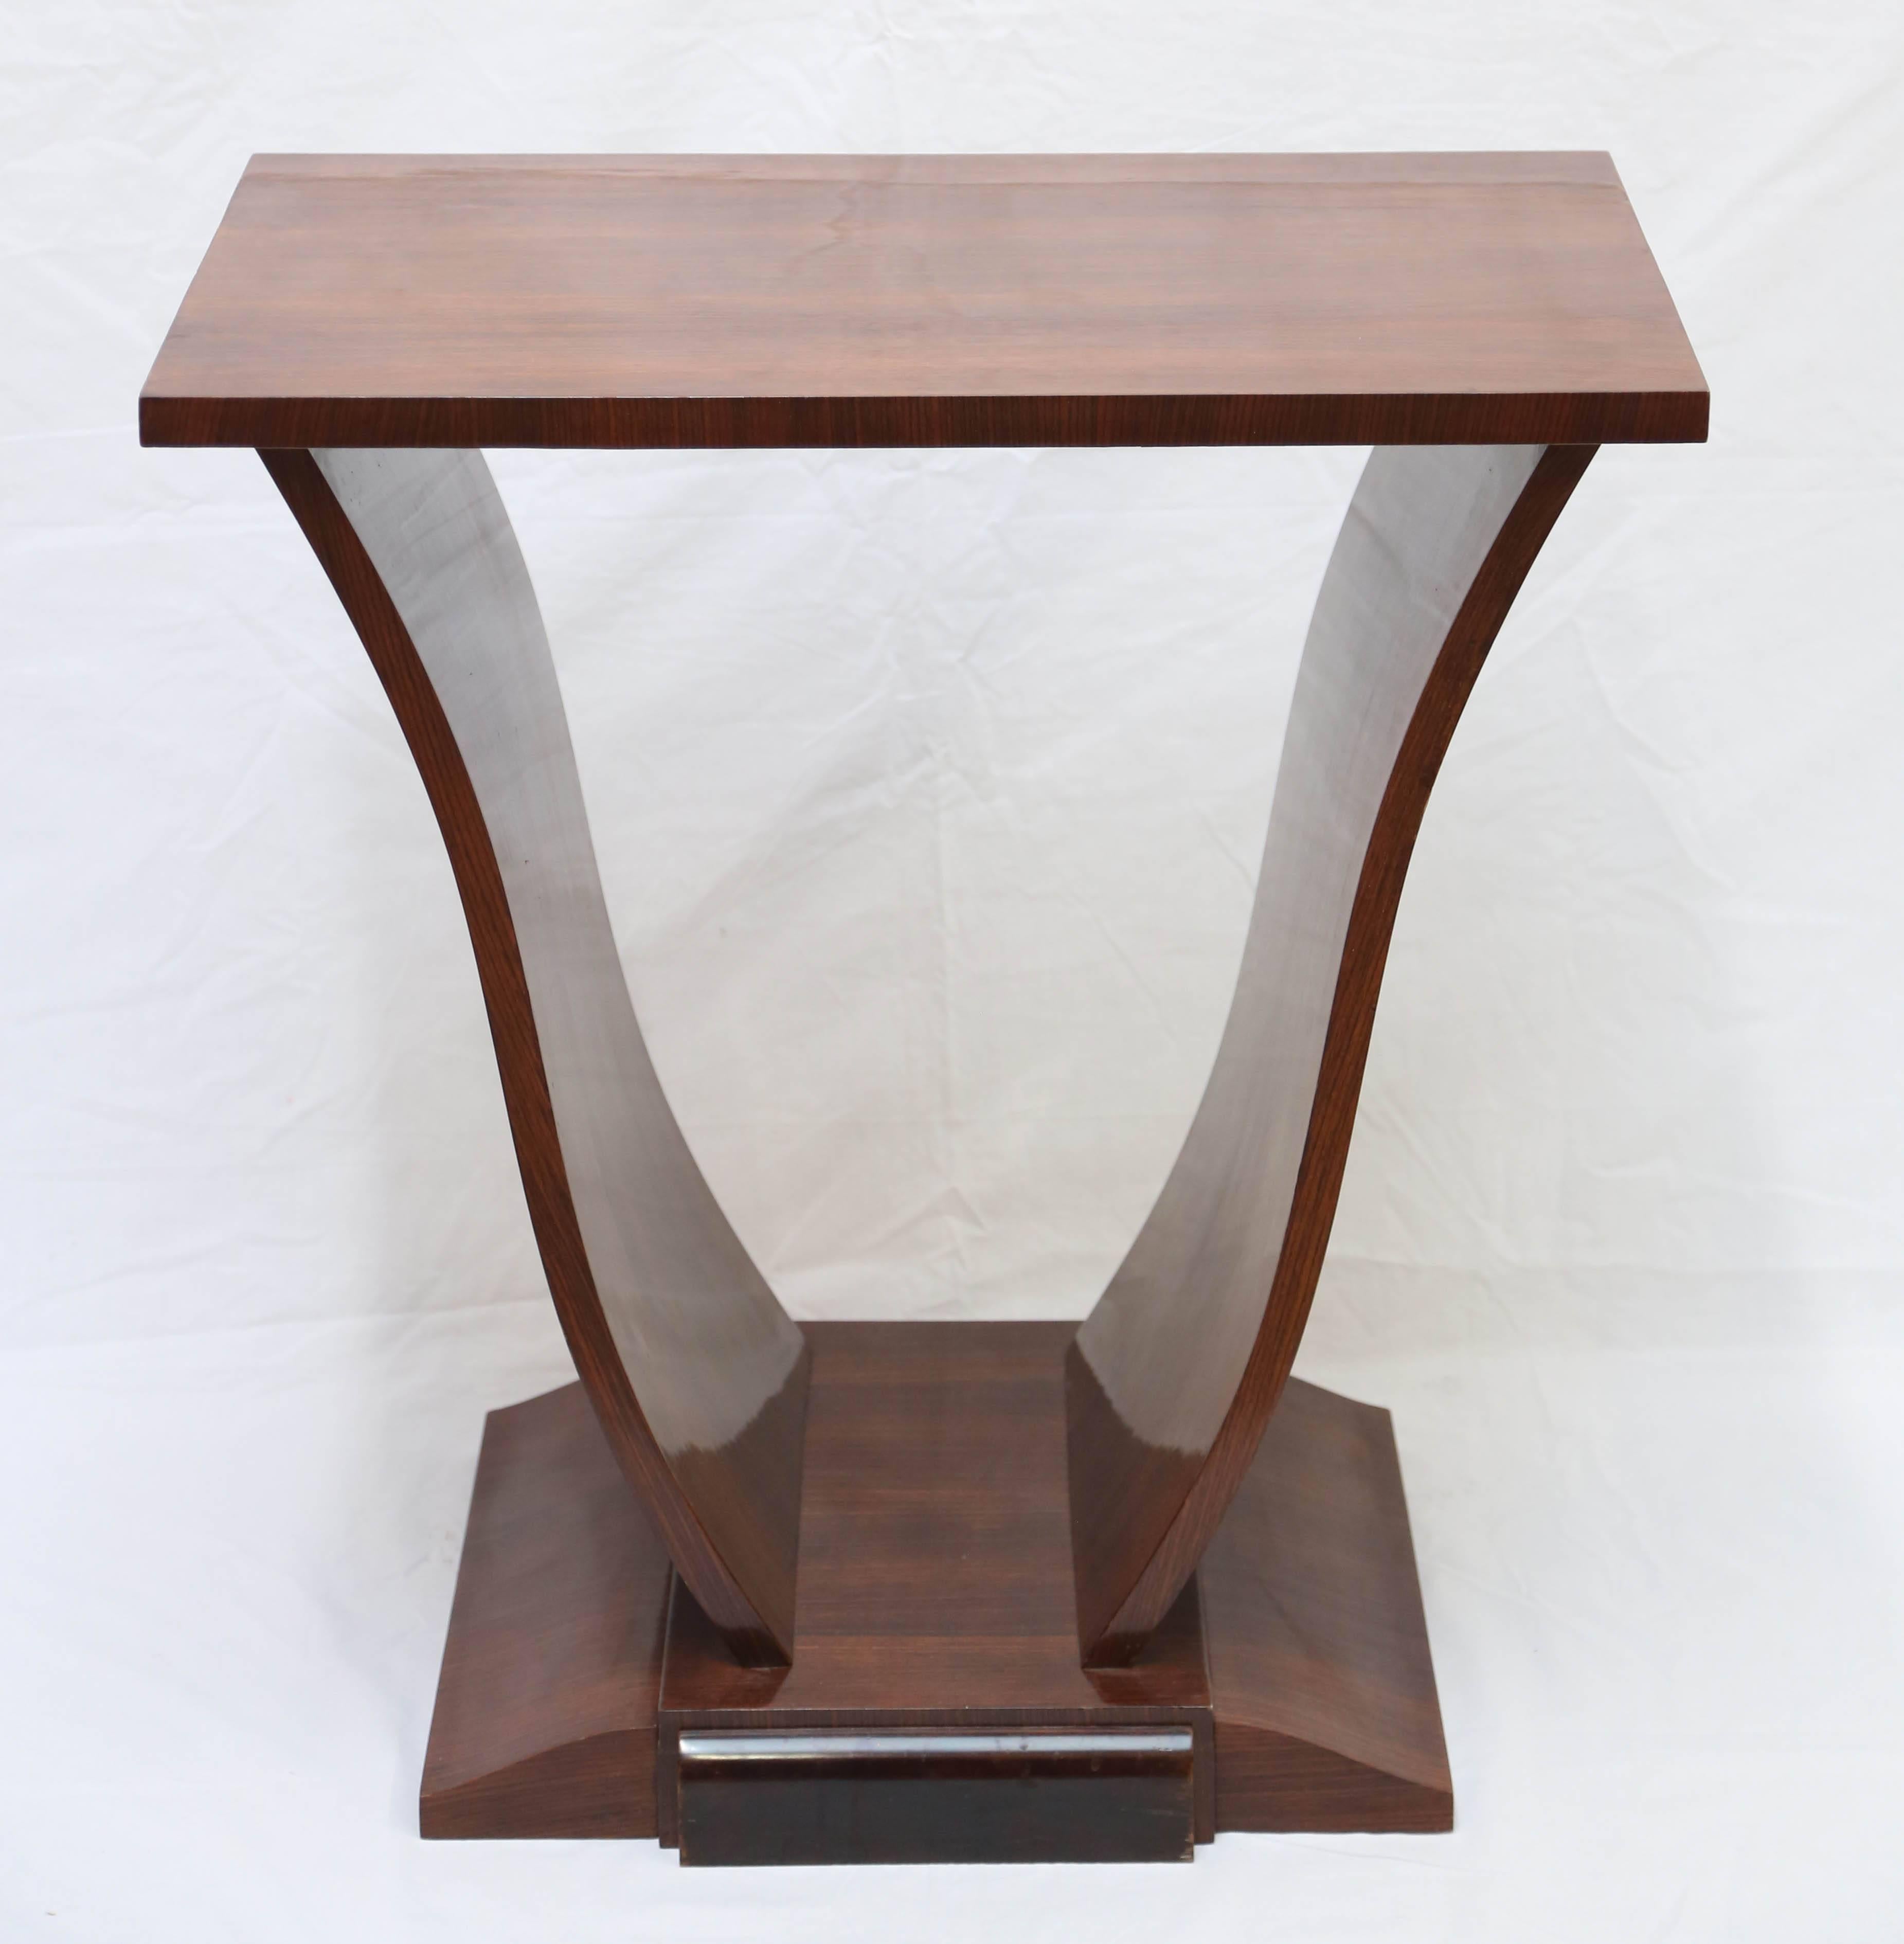 The rectangular top over side supports on a plinth base with ebonized detail. Lovely French polish and warm color to walnut.